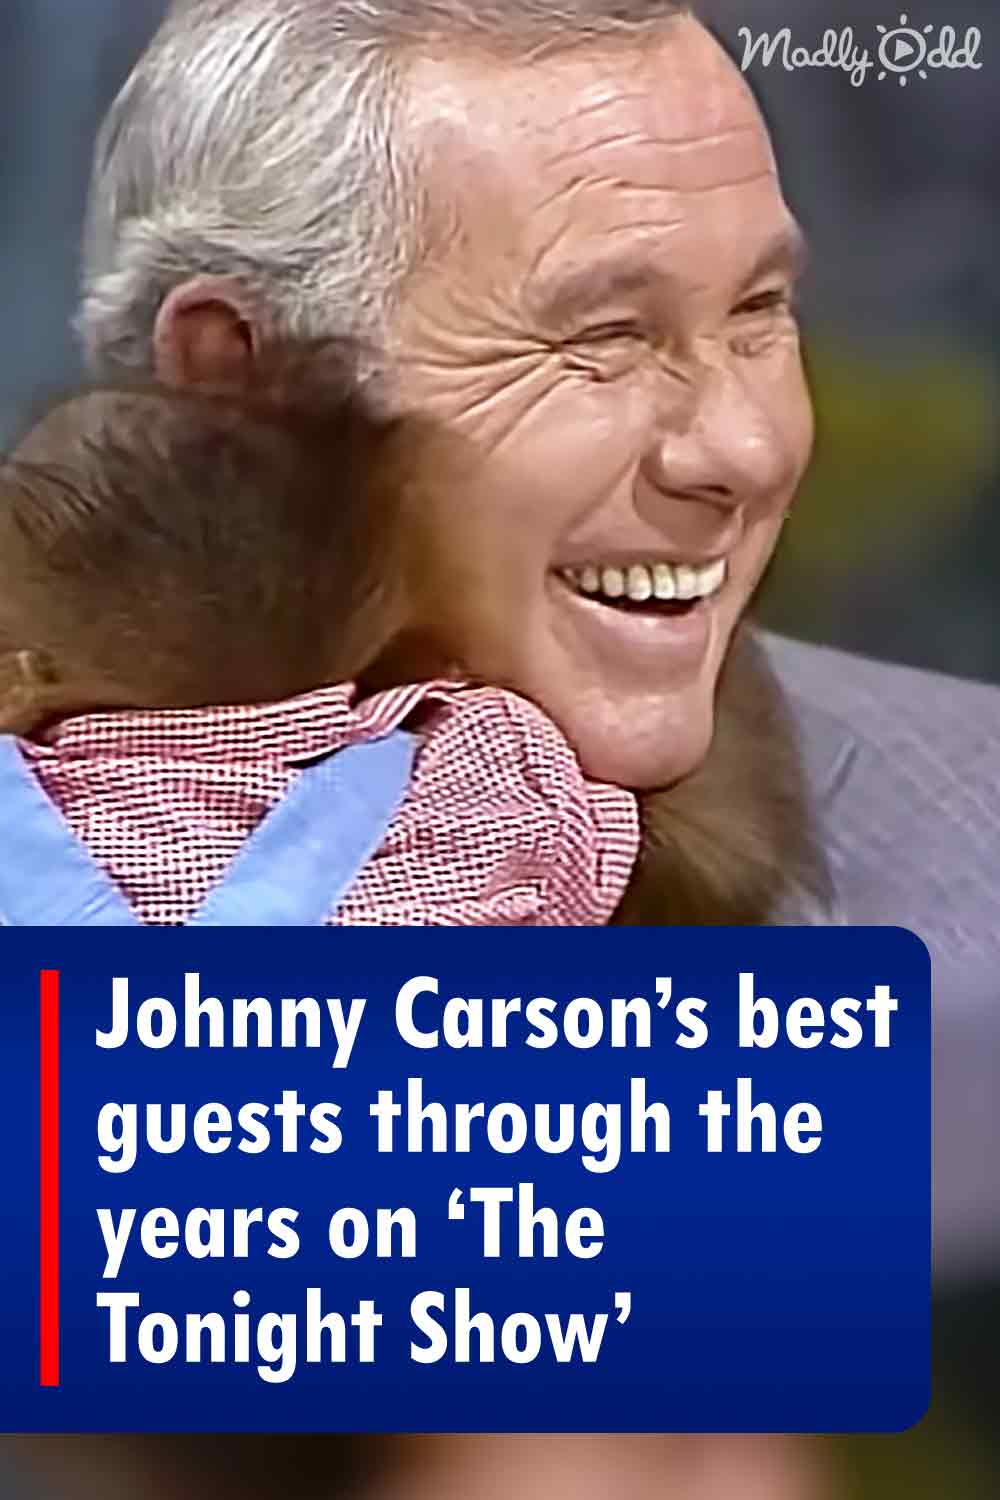 Johnny Carson’s best guests through the years on ‘The Tonight Show’